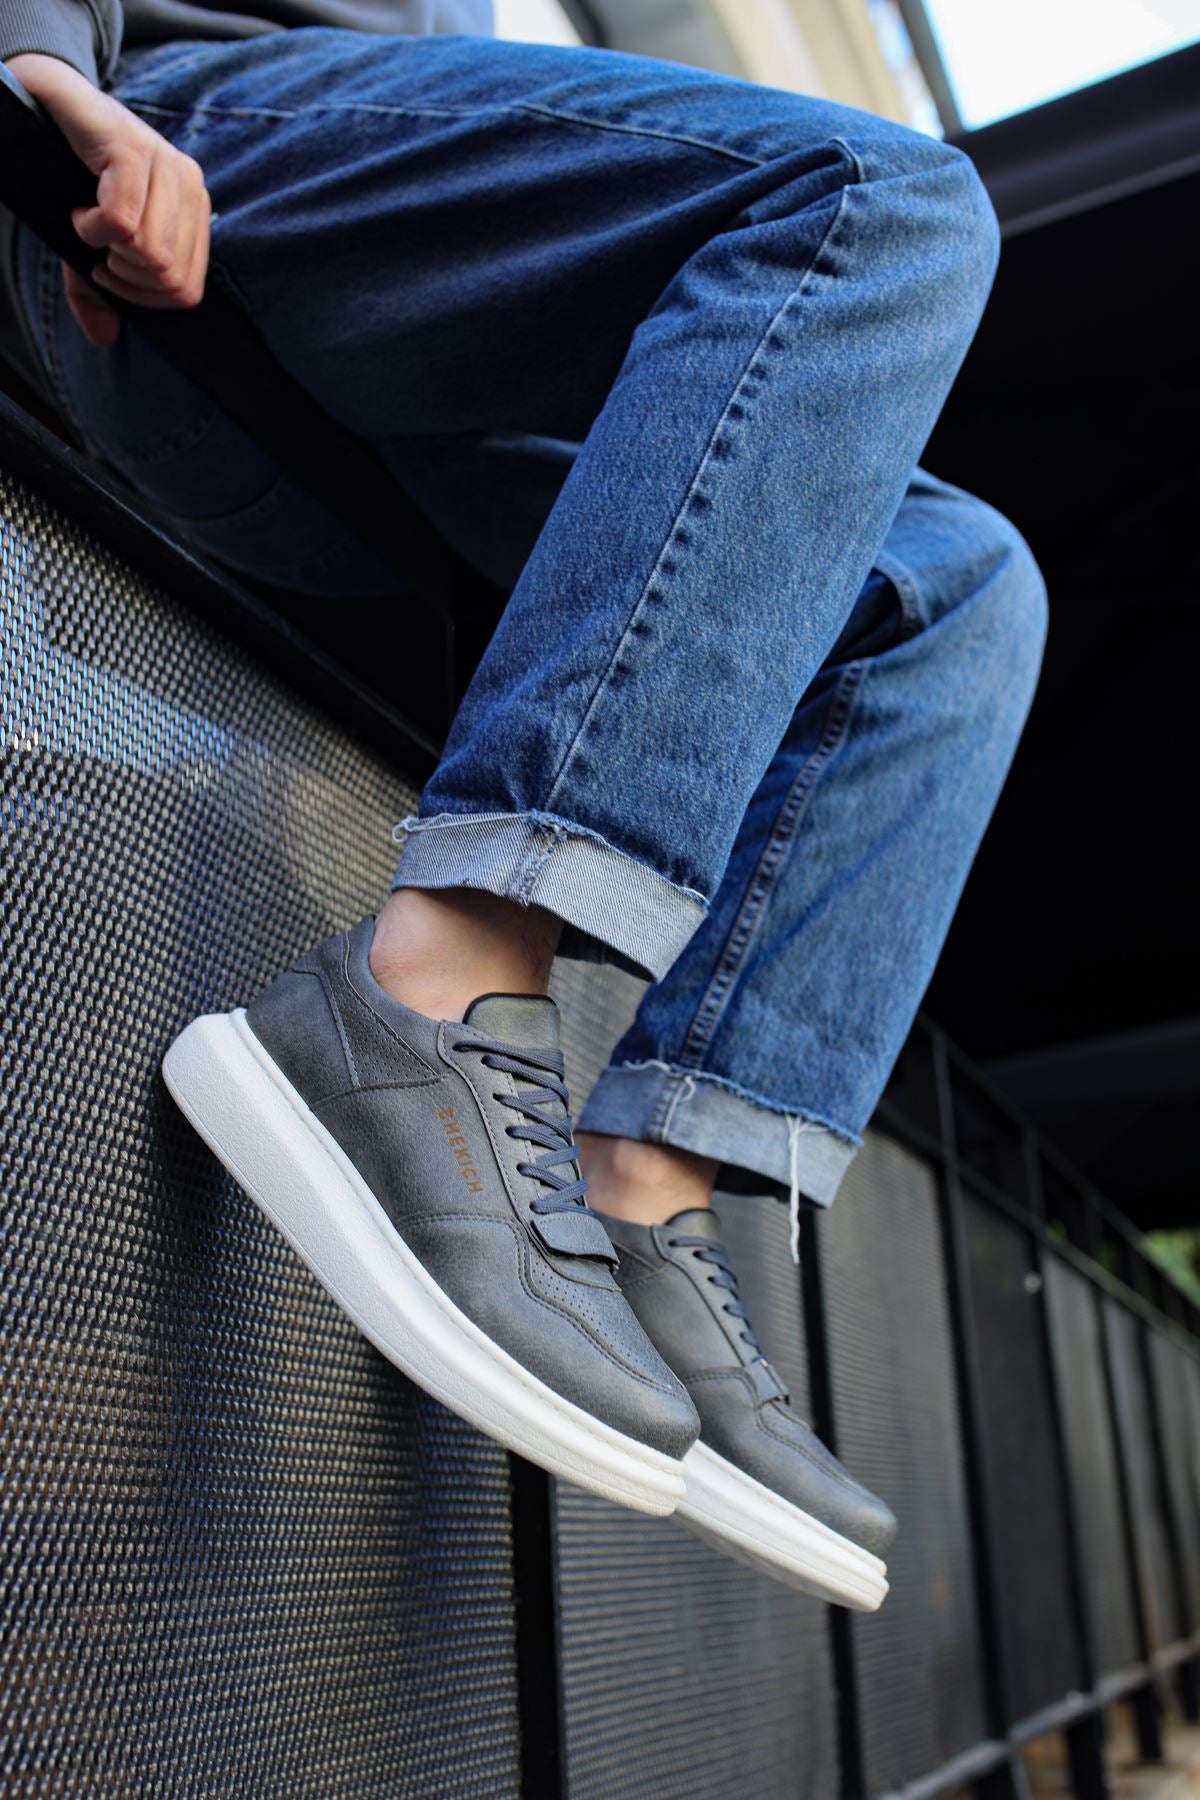 CH073 Men's Unisex Grey Lace-Up Casual Sneaker Sports Shoes - STREETMODE ™